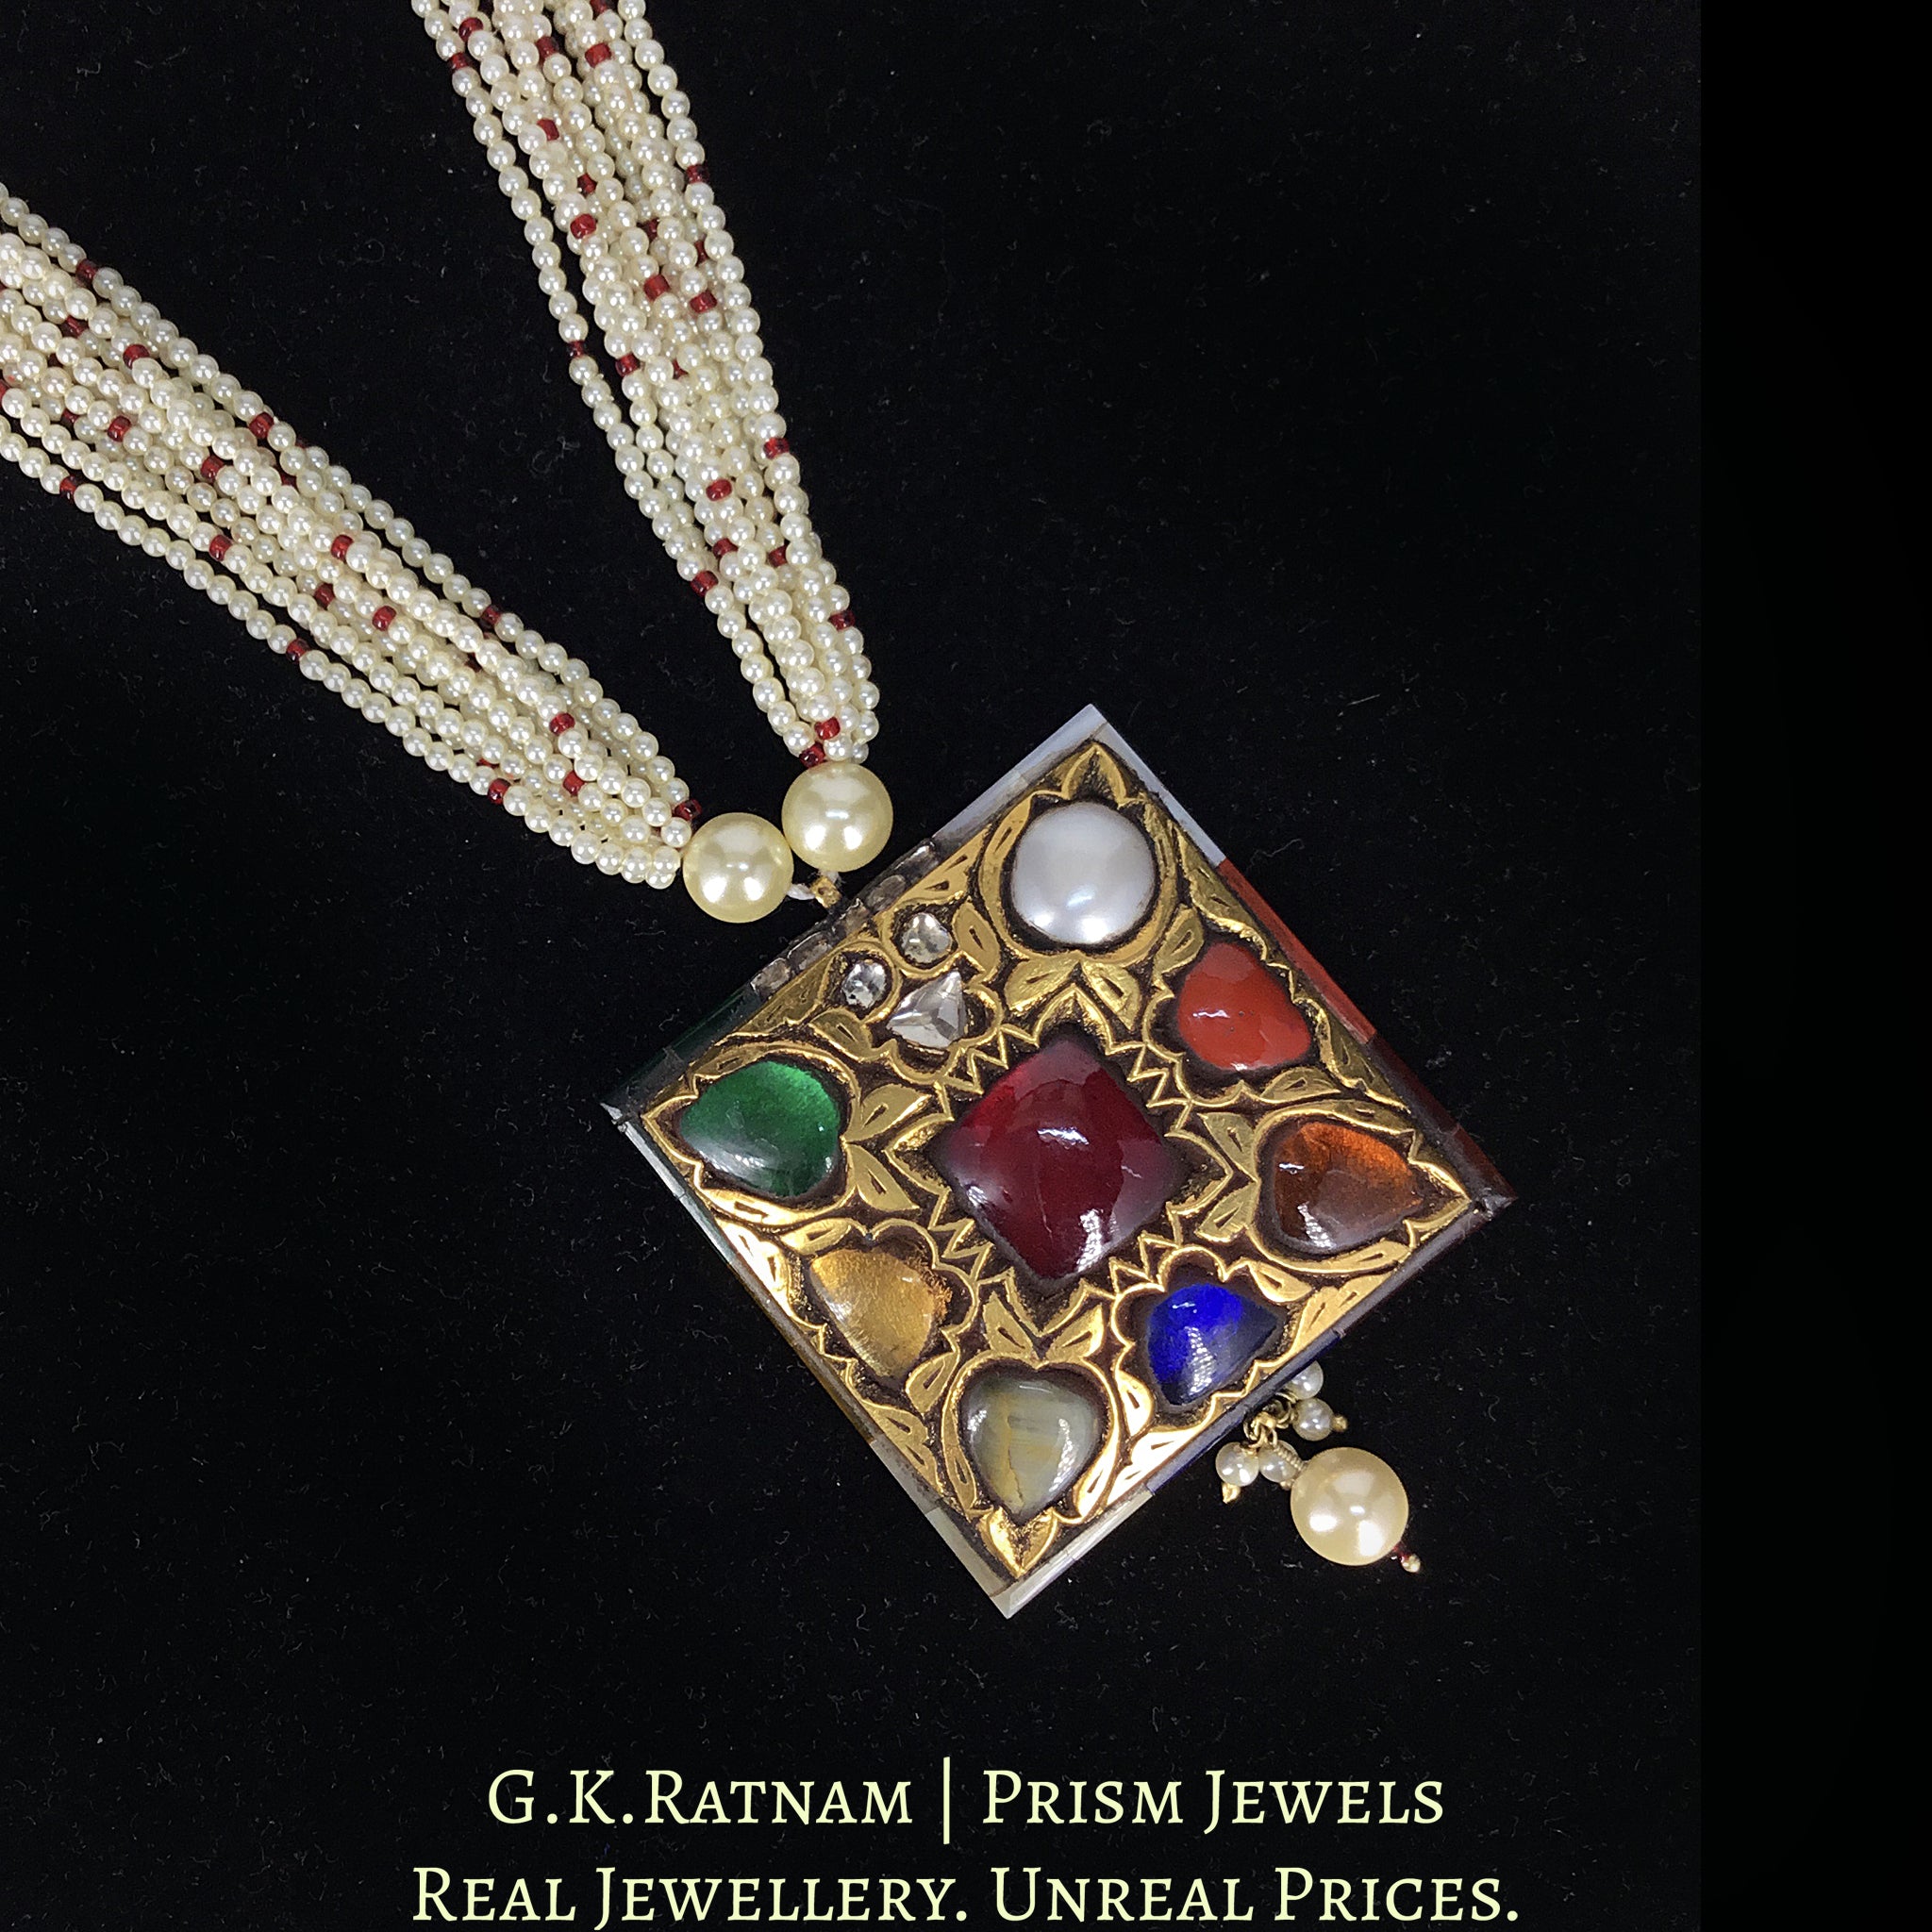 23k Gold and Diamond Polki Navratan Pendant strung in lustrous pearl bunches with a hint of red